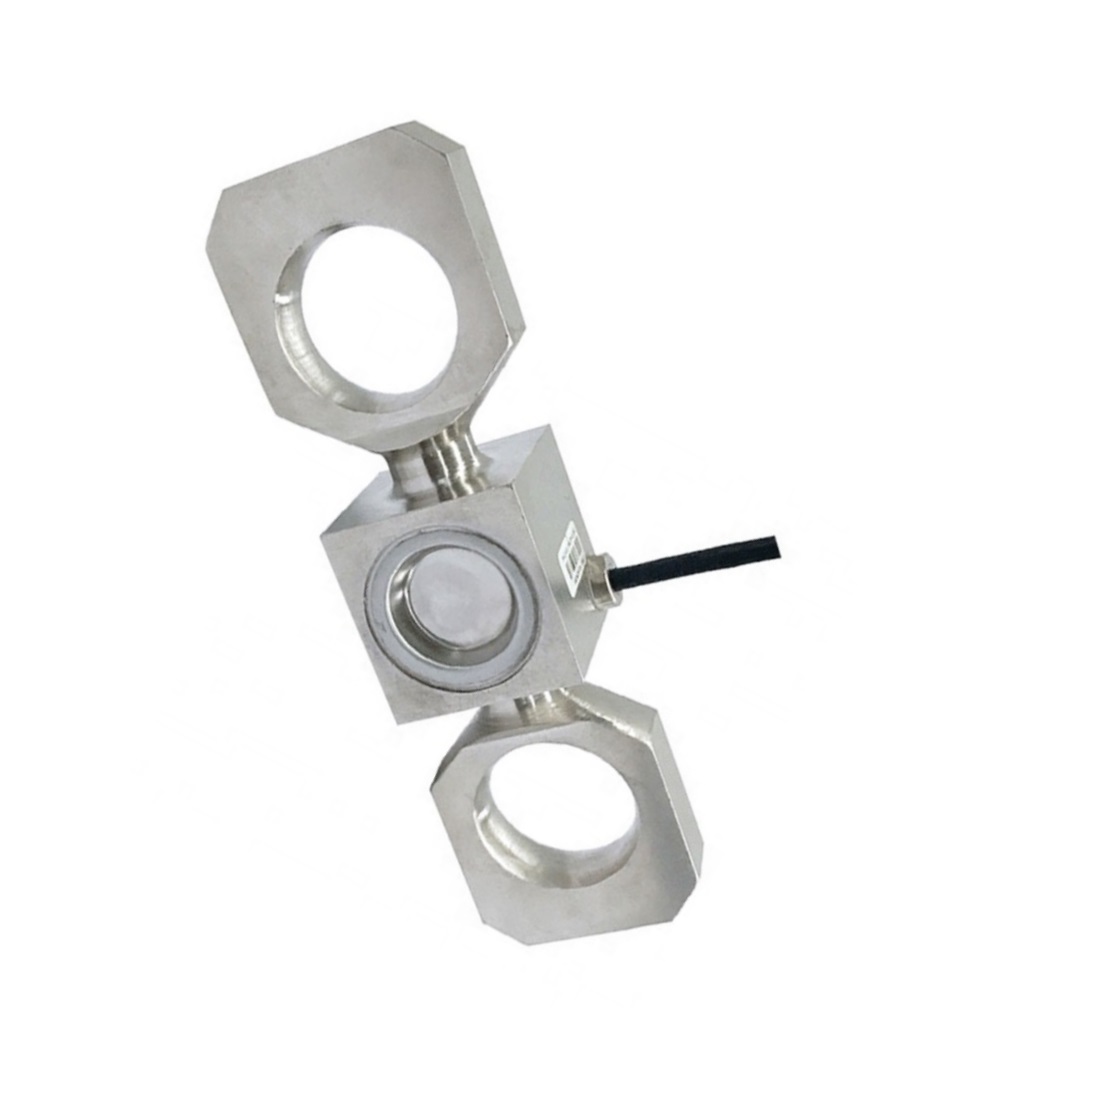 LC2999 Amazon Cable Tension Load Cell Dynamometer Tension Load Cell 2/3/5/10/15/20/30/50T